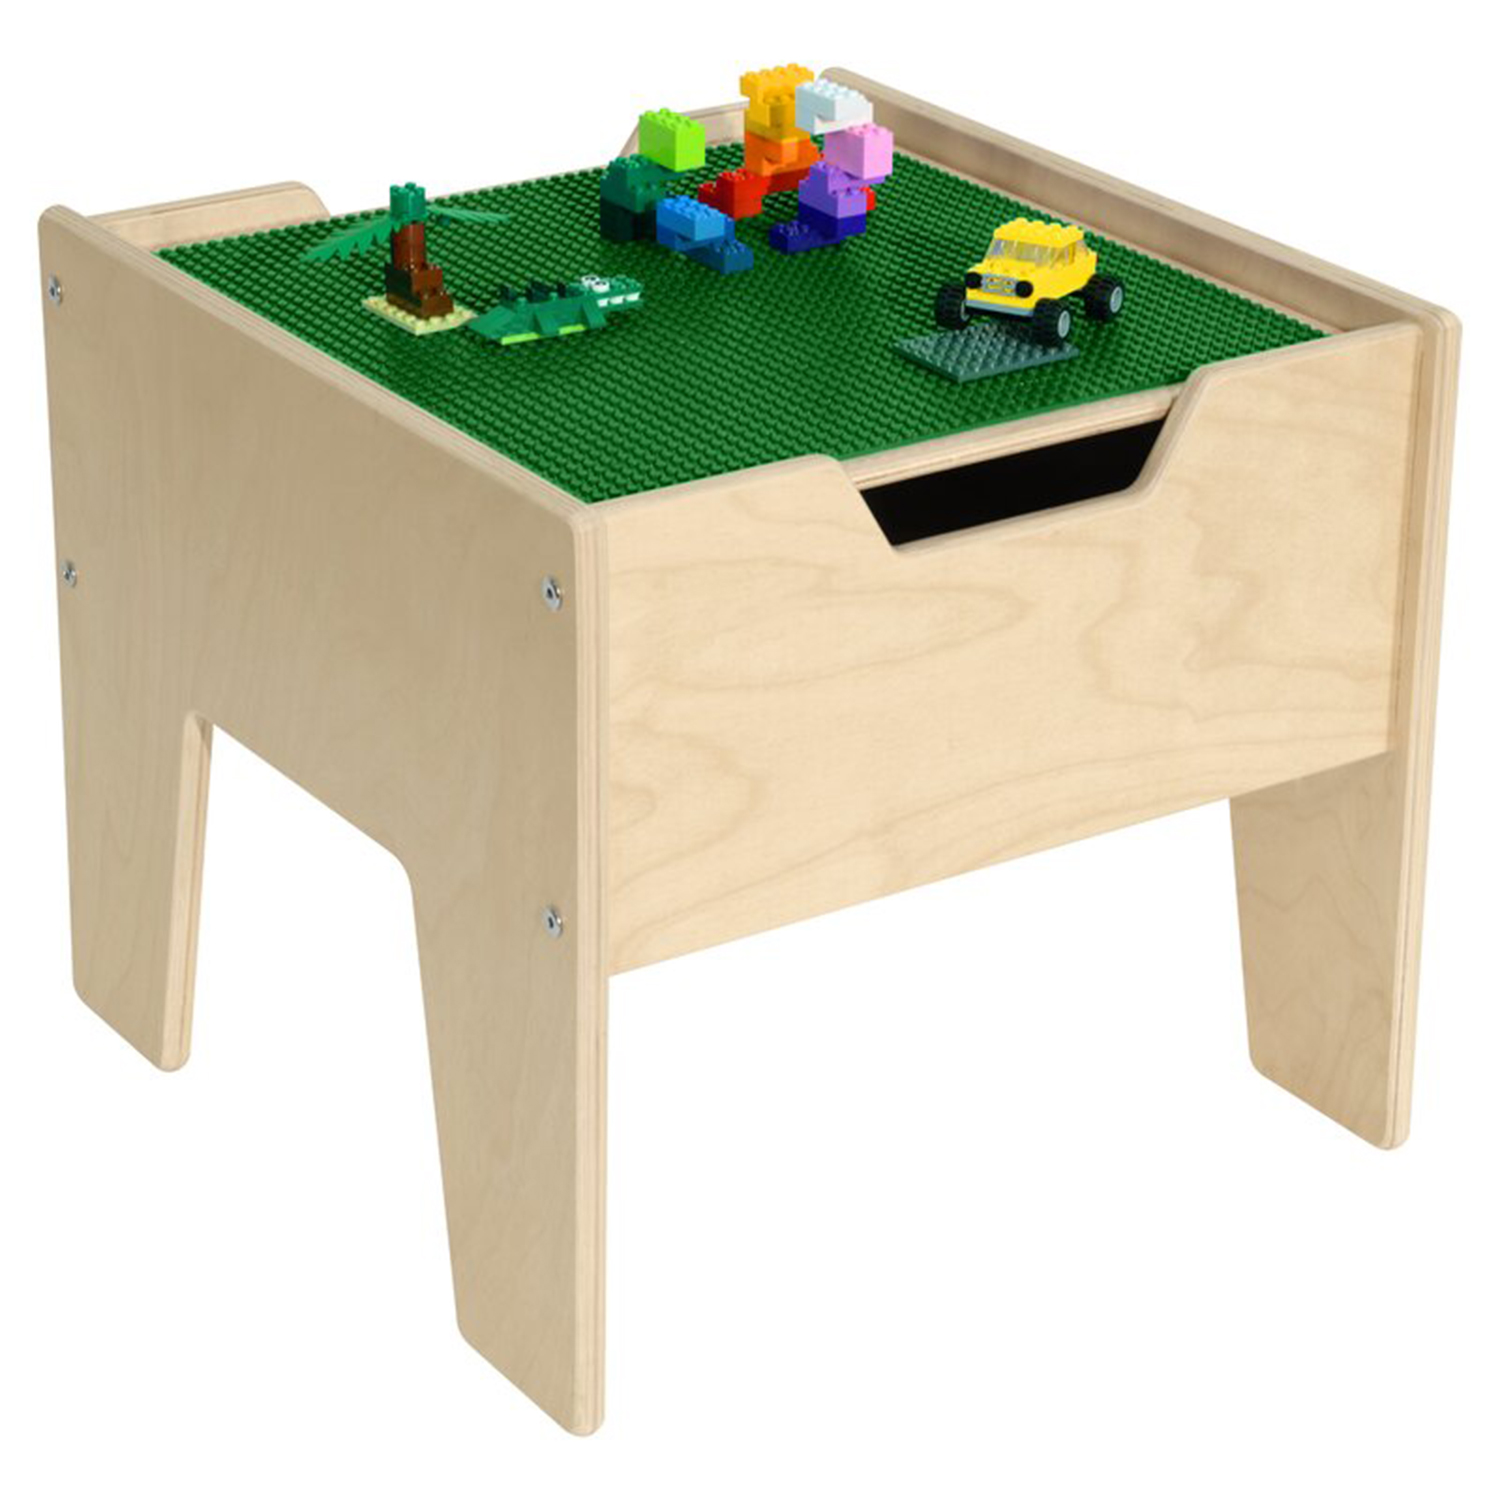 Best Lego Table for Toddler Play: Wood Designs Contender Kids Square Interactive Table 